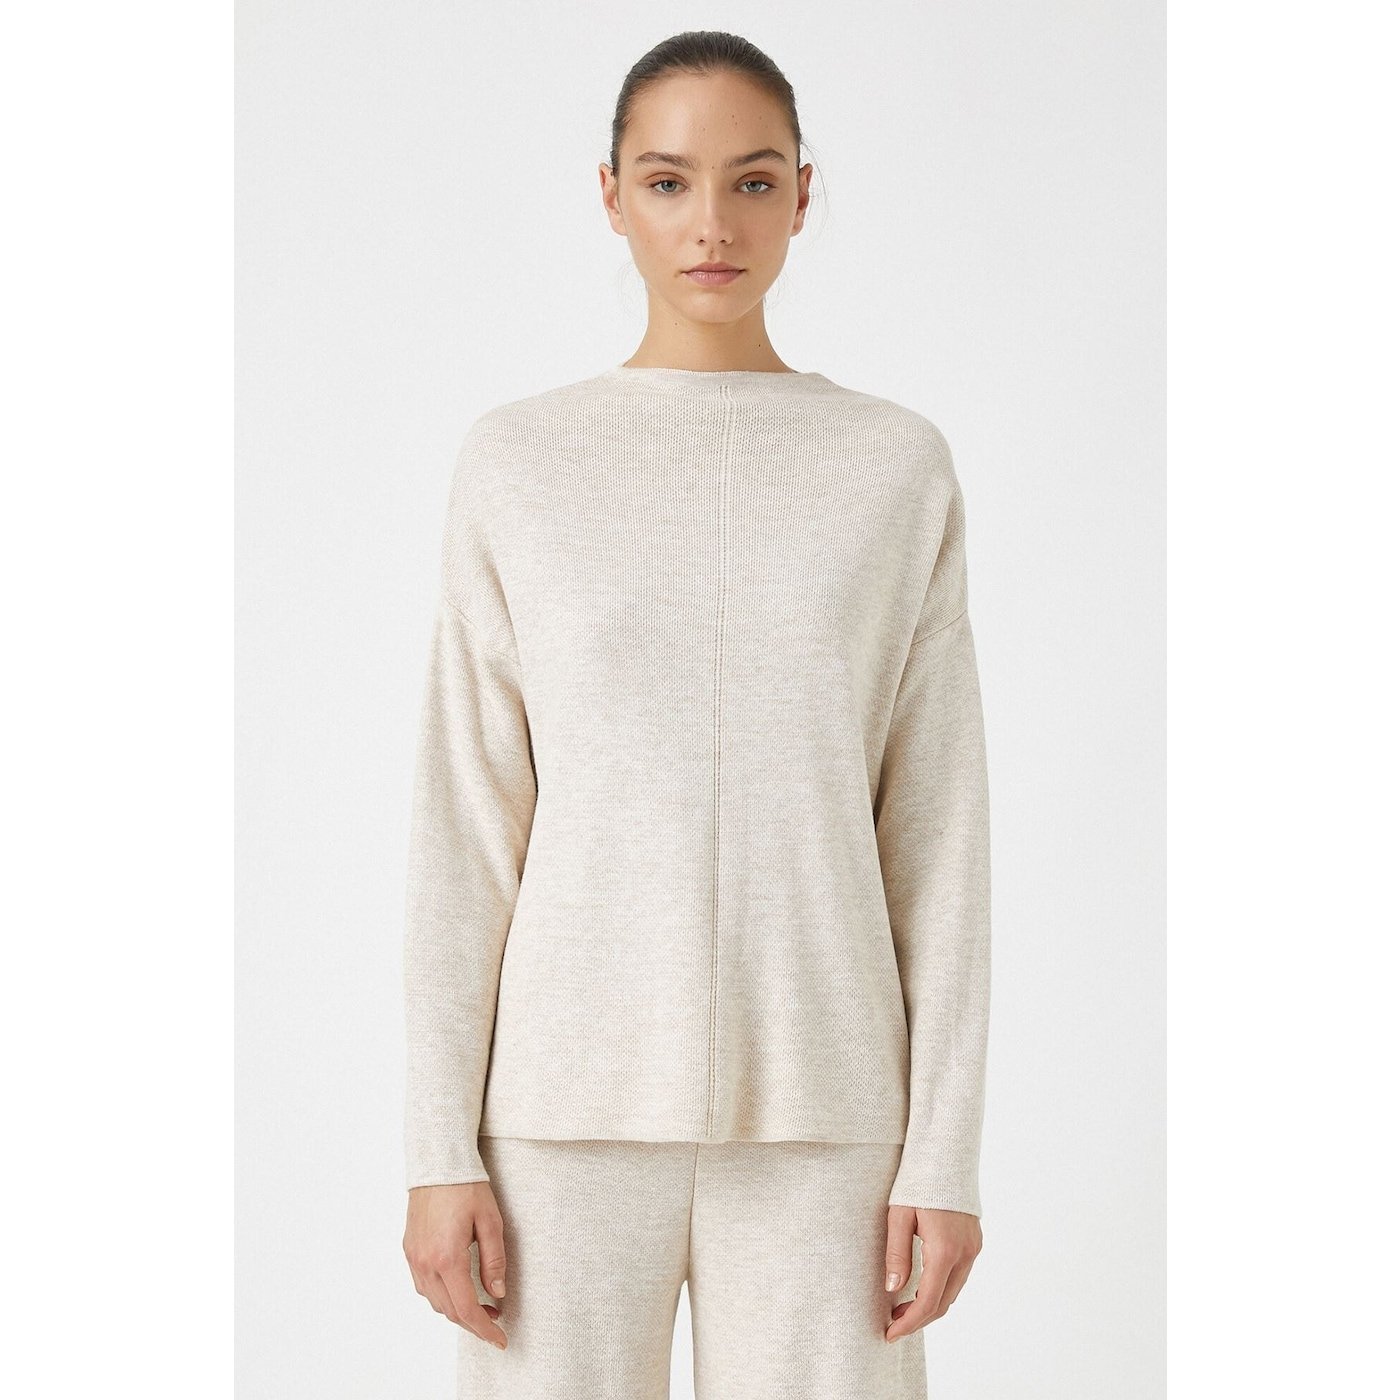 Koton Sweater - Beige - Relaxed